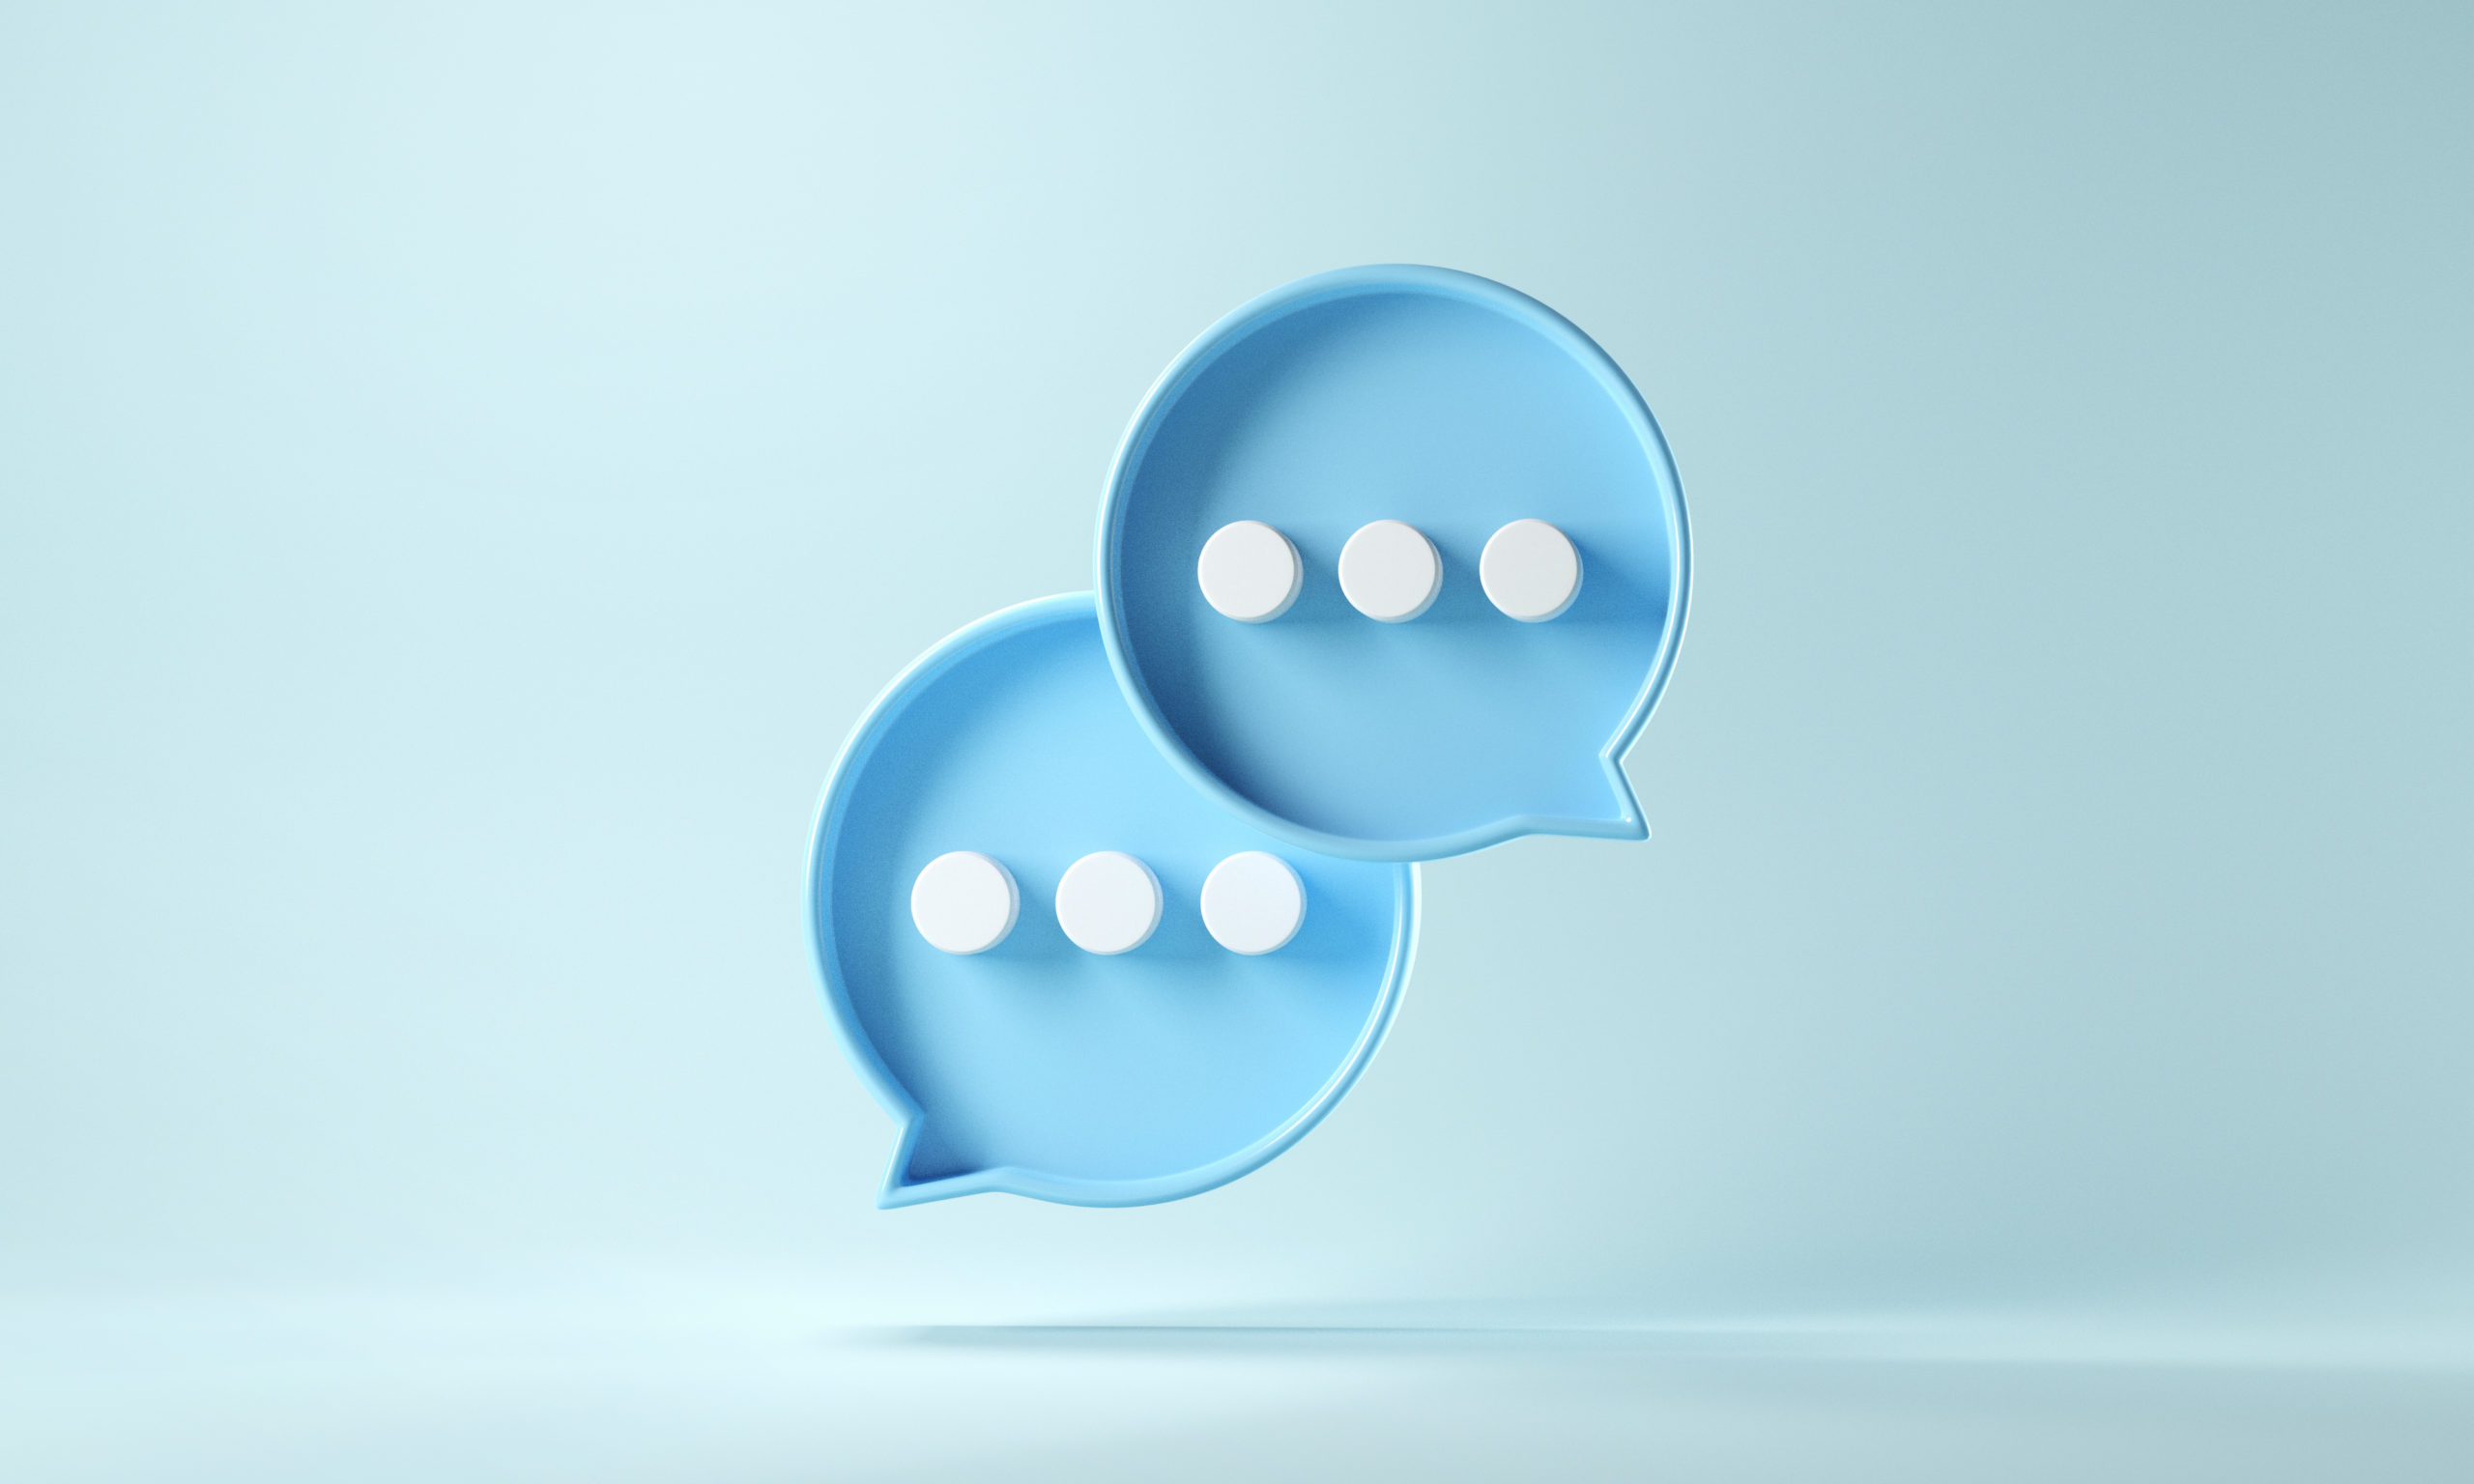 Bubble icons symbolizing communication between employees and managers